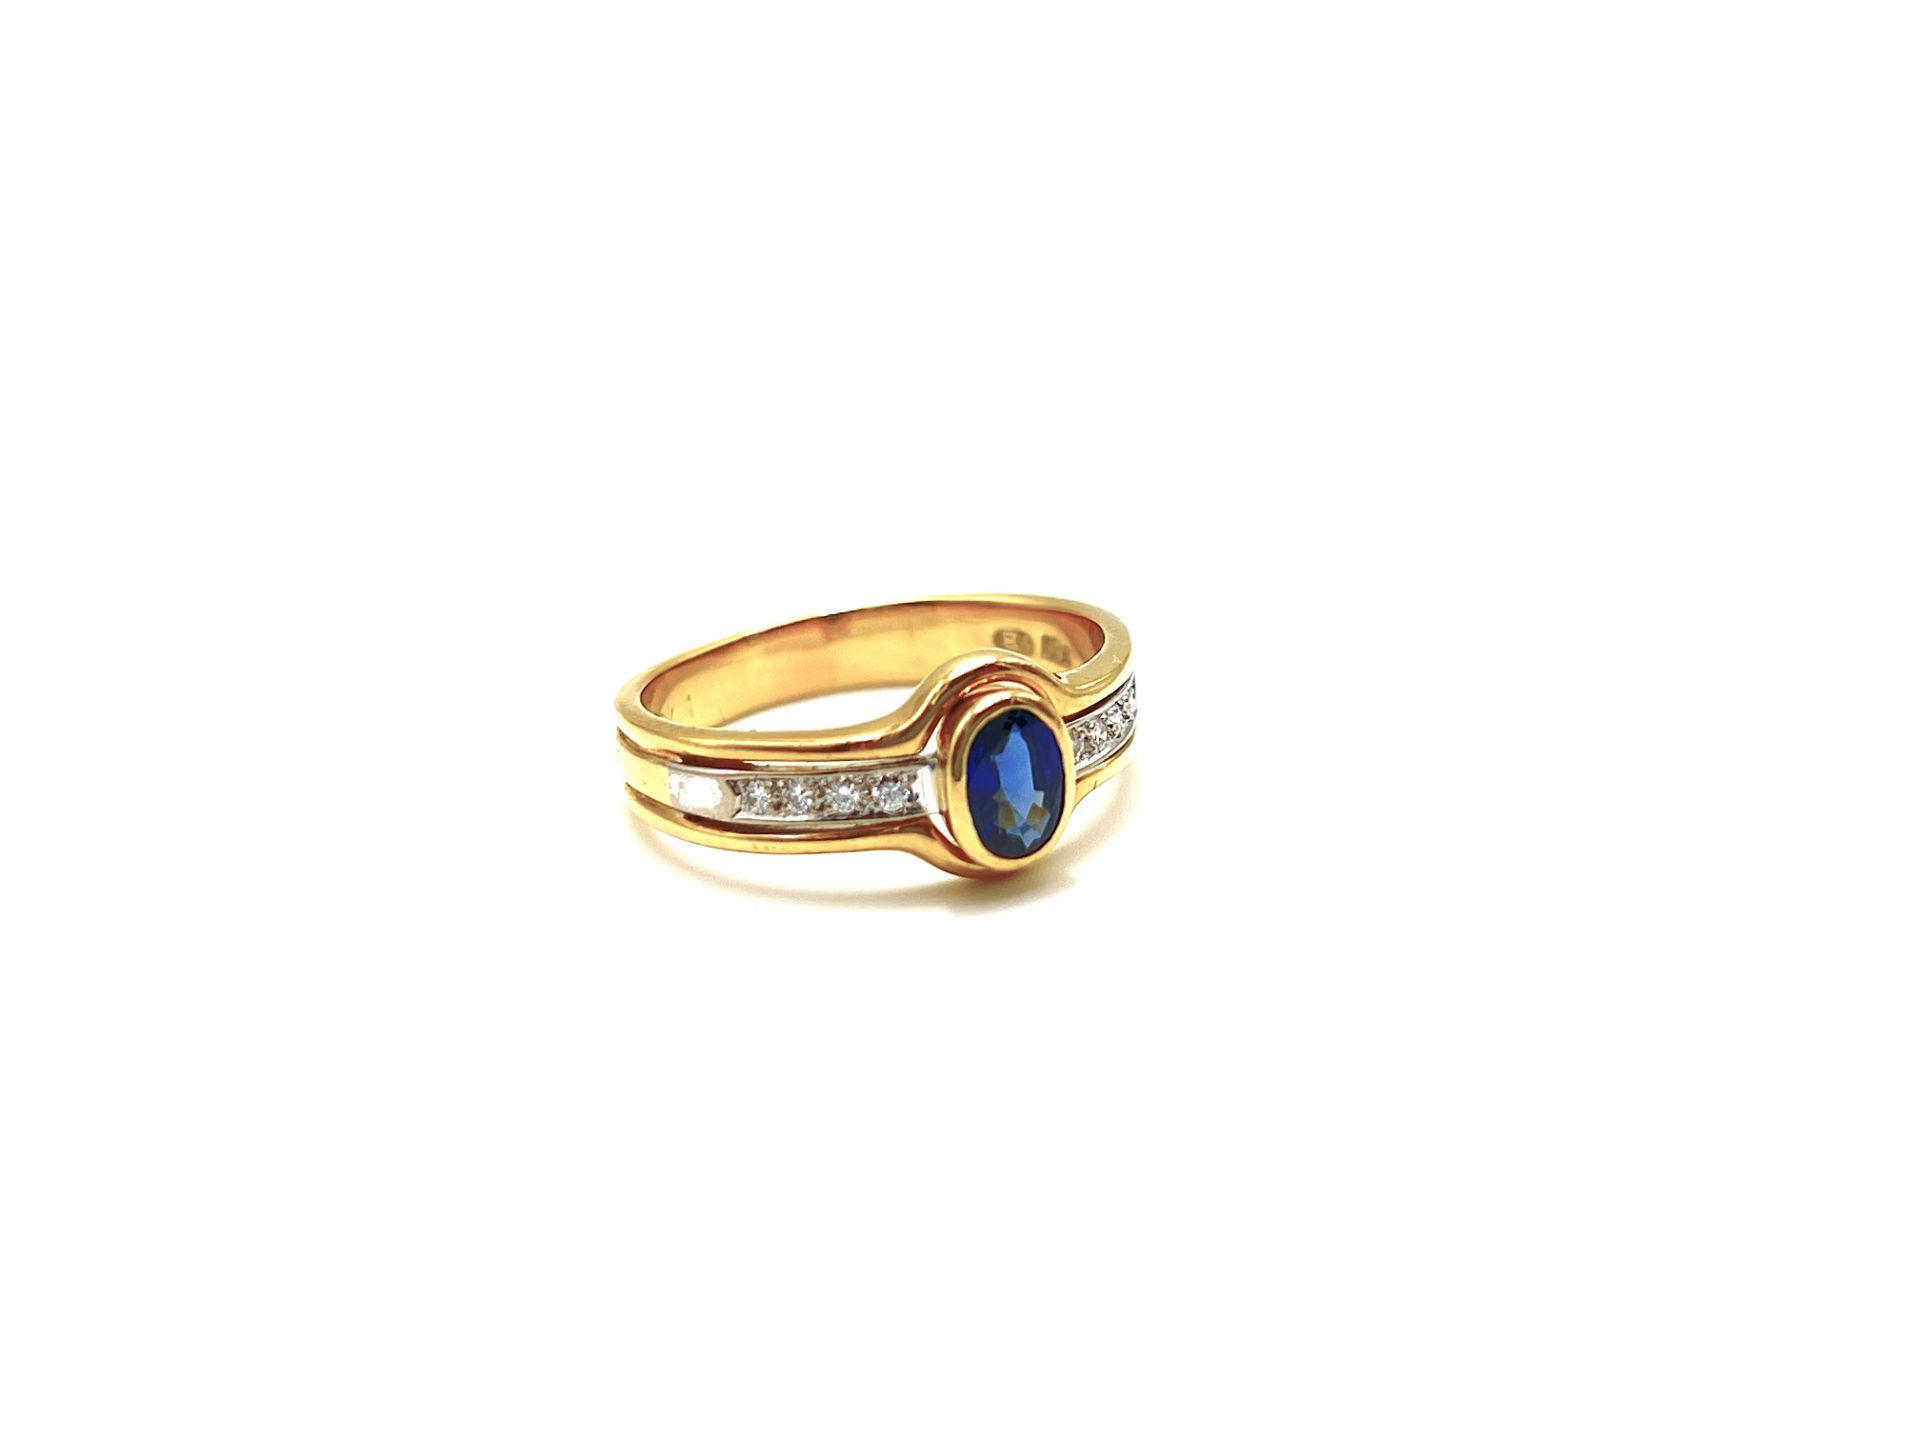 Sapphire ring with brillant-cut diamonds - Image 3 of 8